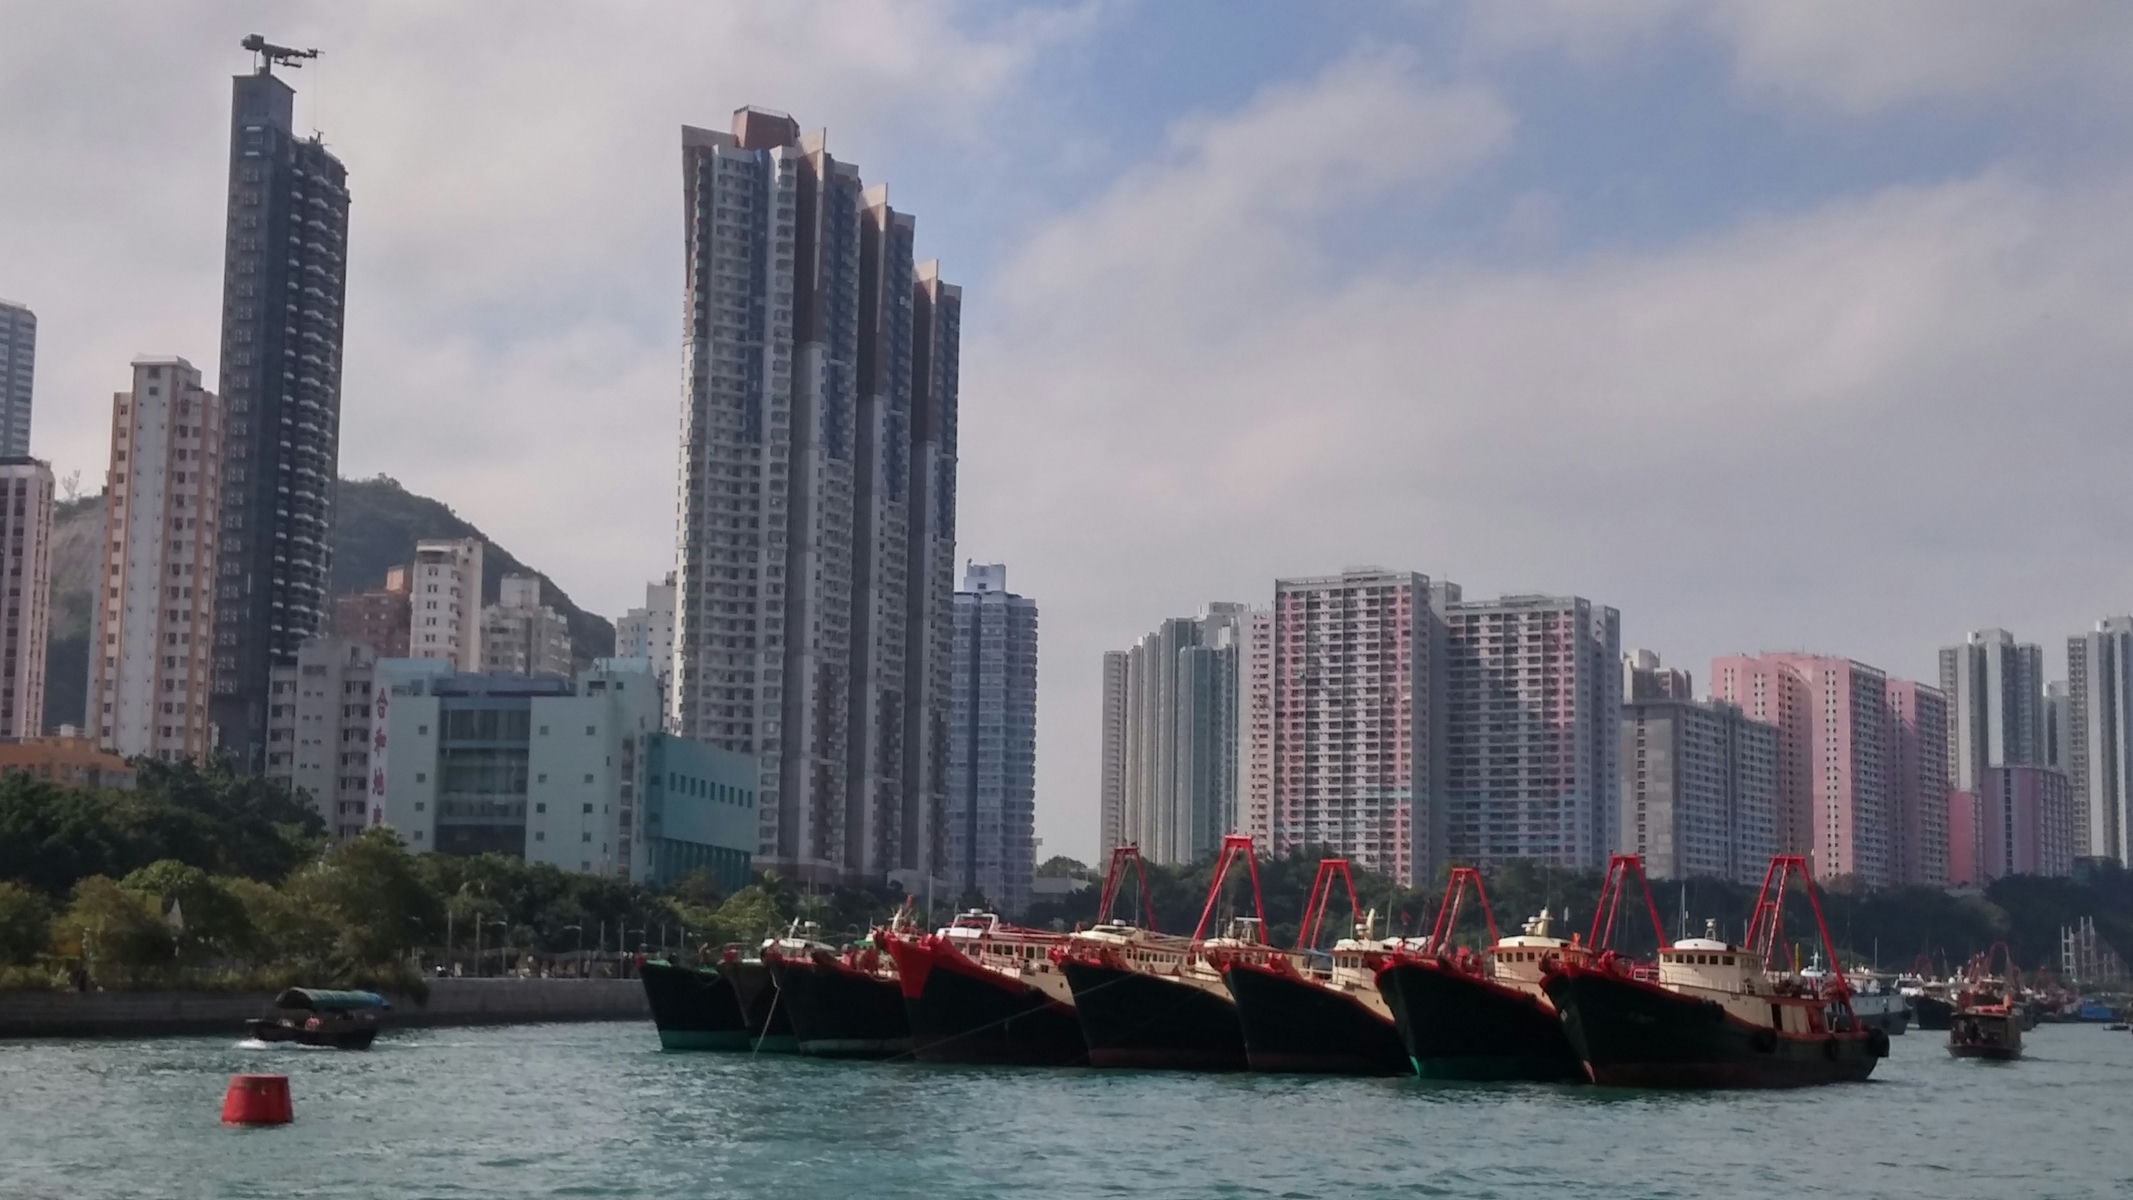 Ap Lei Chau and the trawlers at Aberdeen Typhoon Shelter